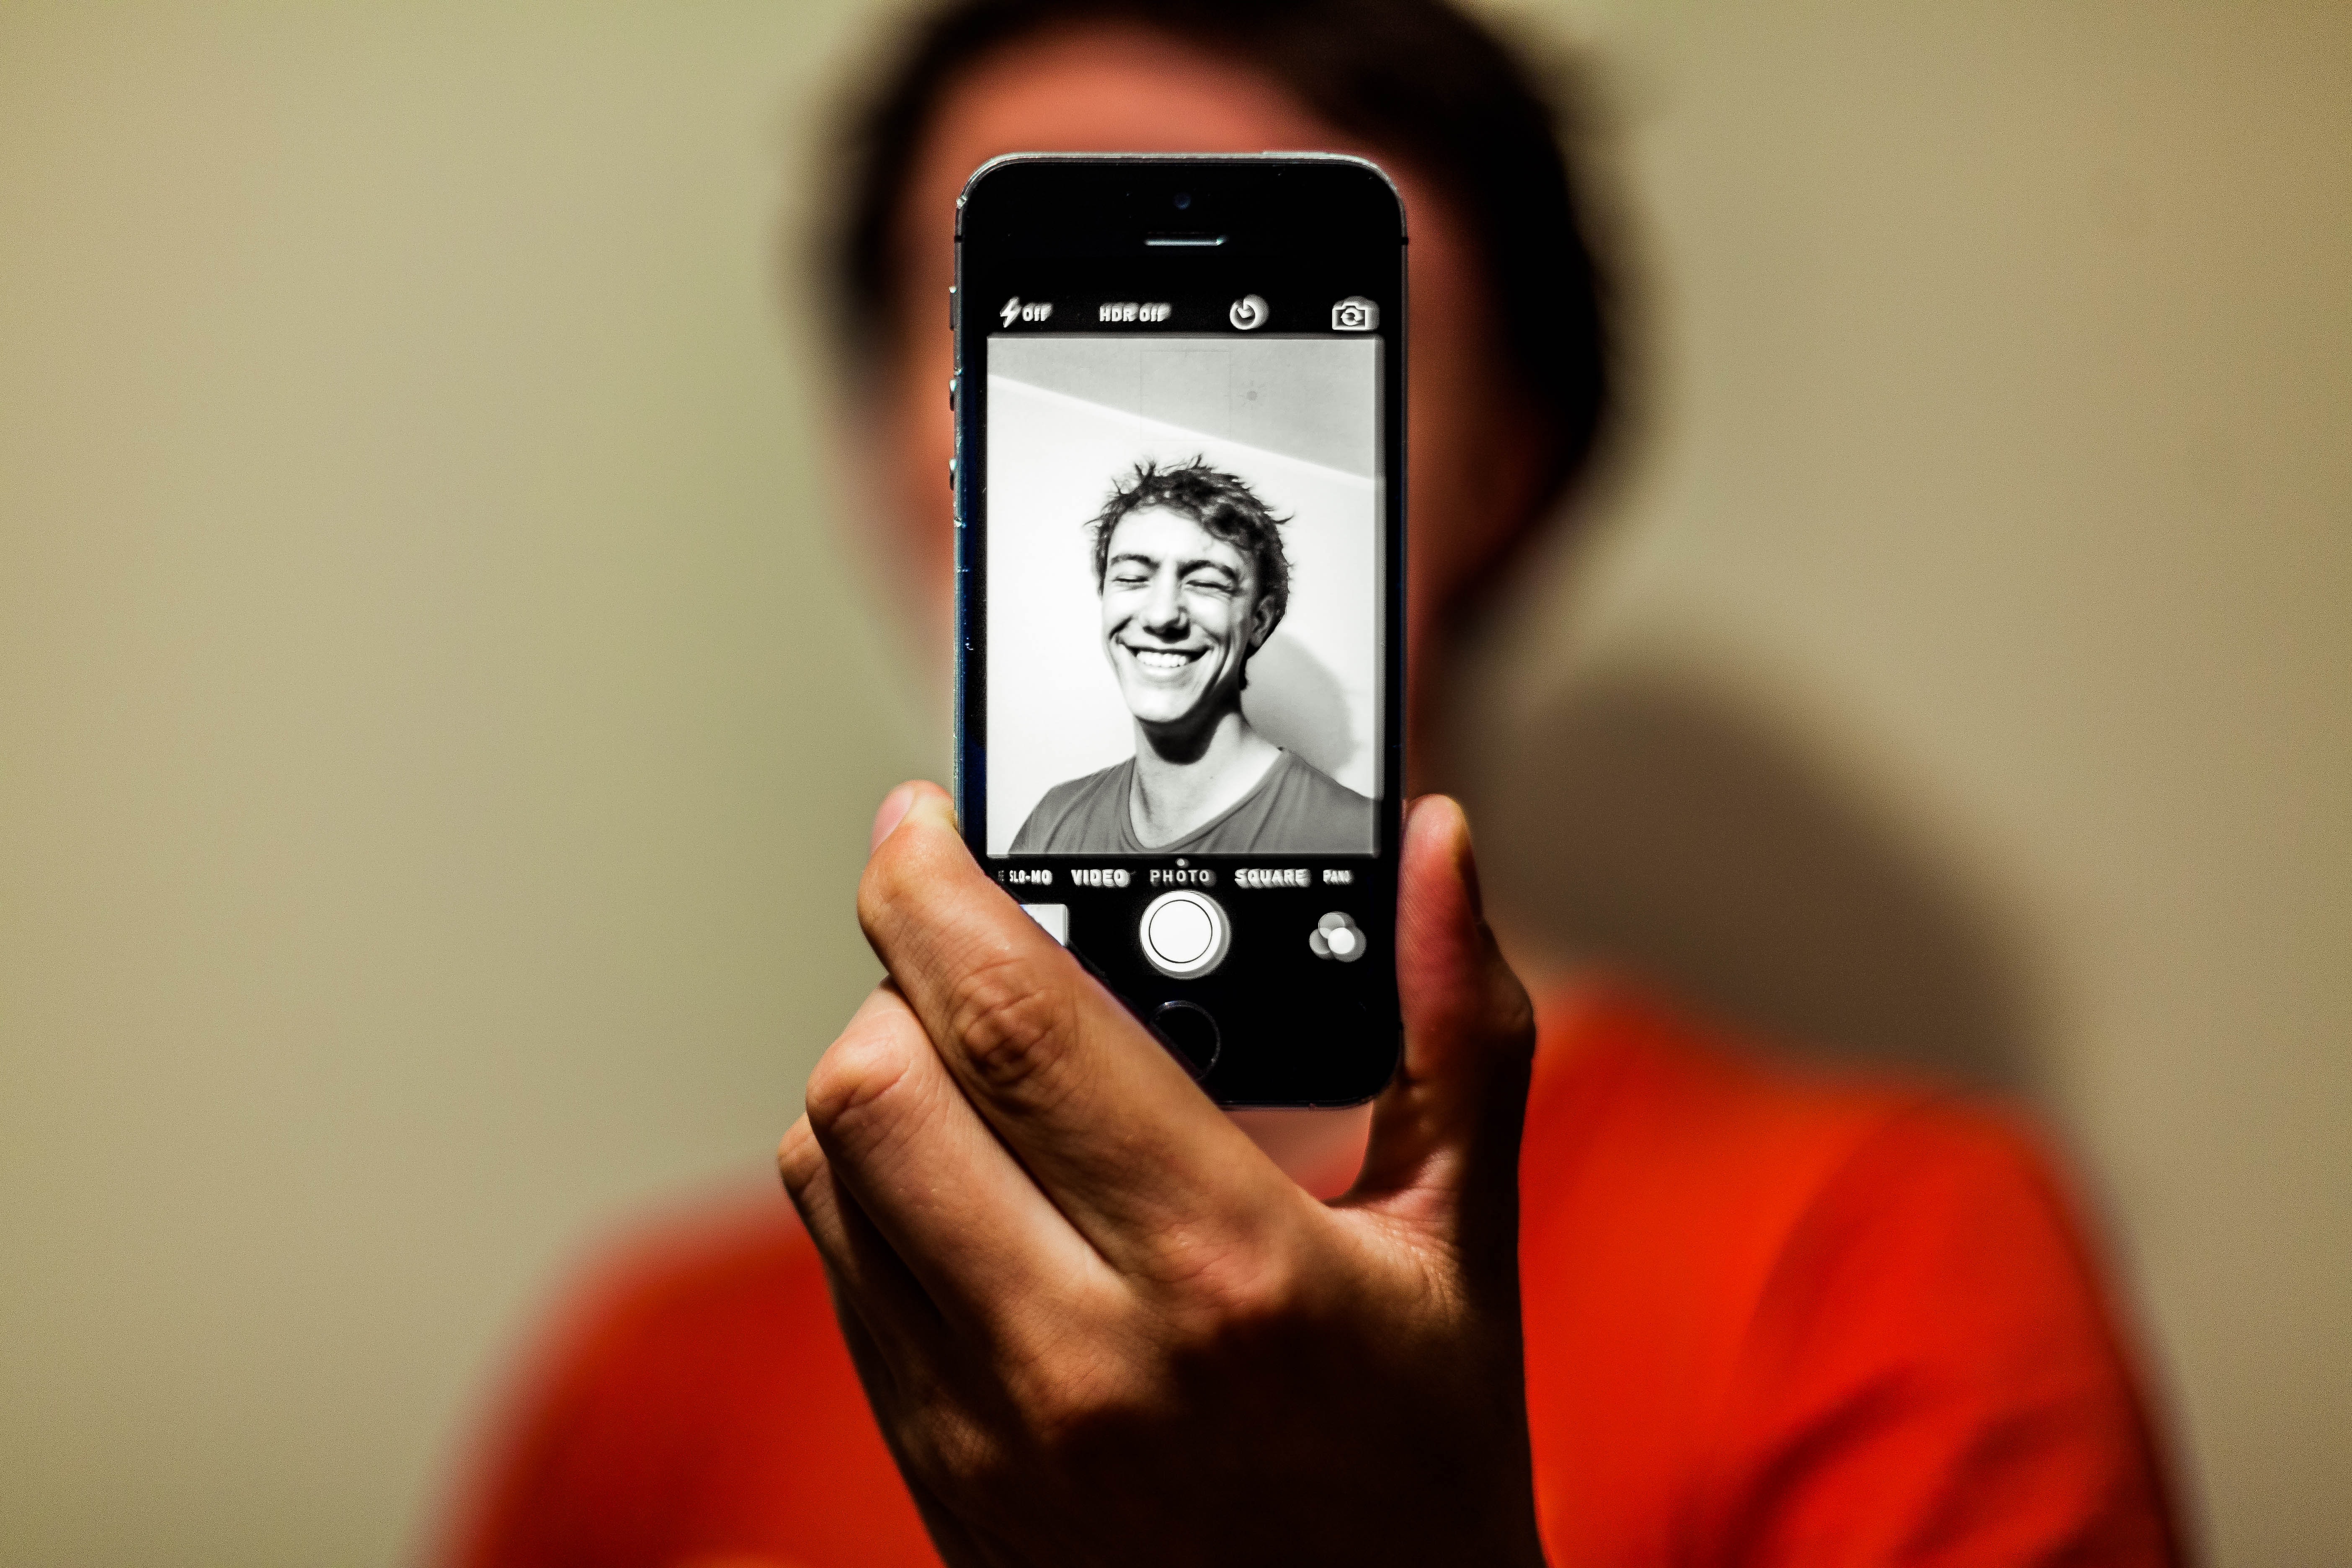 Man in red shirt having selfie on his iphone in grayscale mode photo